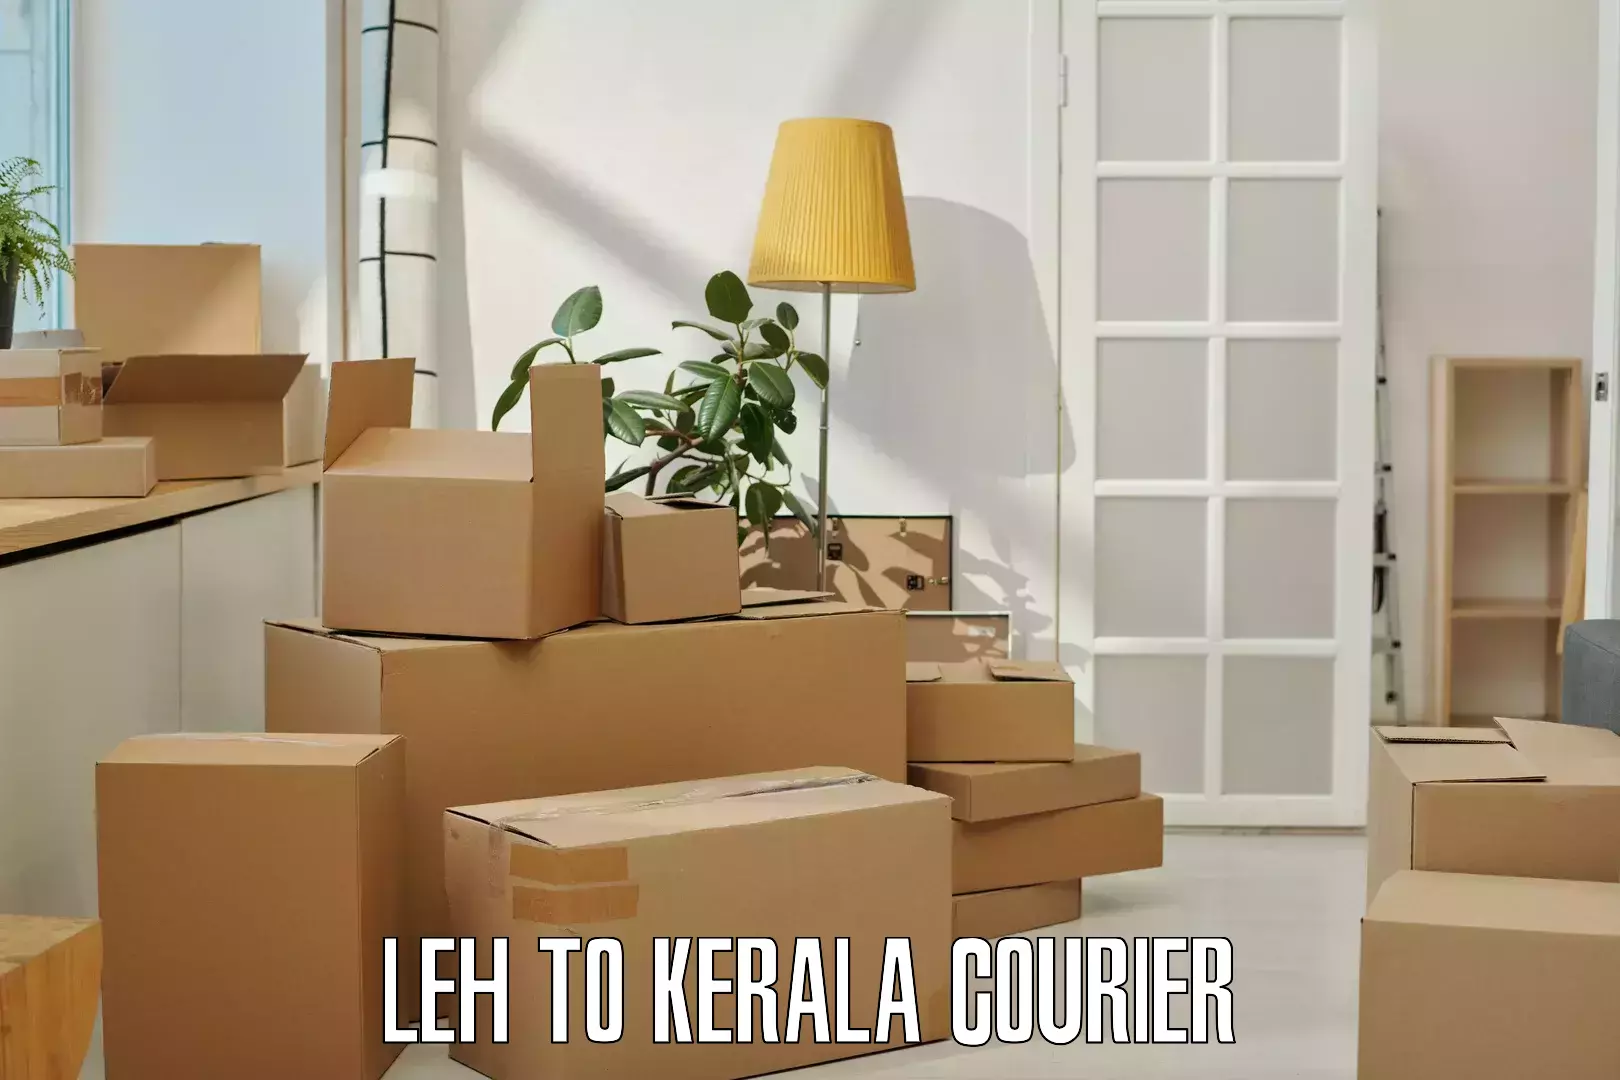 Next-day delivery options Leh to Cochin Port Kochi